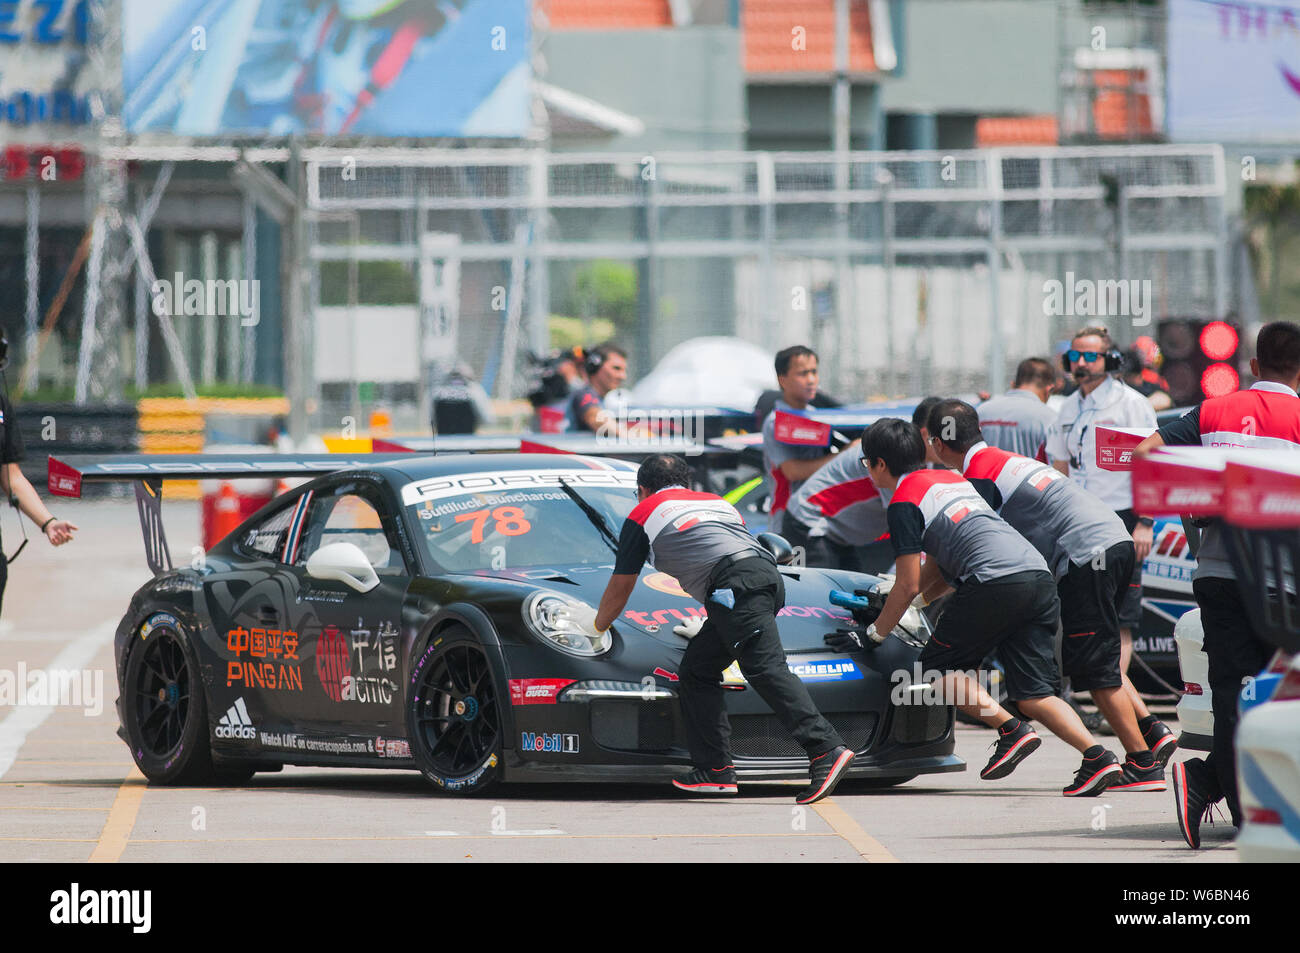 Bang Saen, Thailand - July 1, 2017: The Porsche GT3 Cup of Suttiluck  Buncharoen from Thailand being pushed at the pit lane during Porsche  Carrera Cup Stock Photo - Alamy